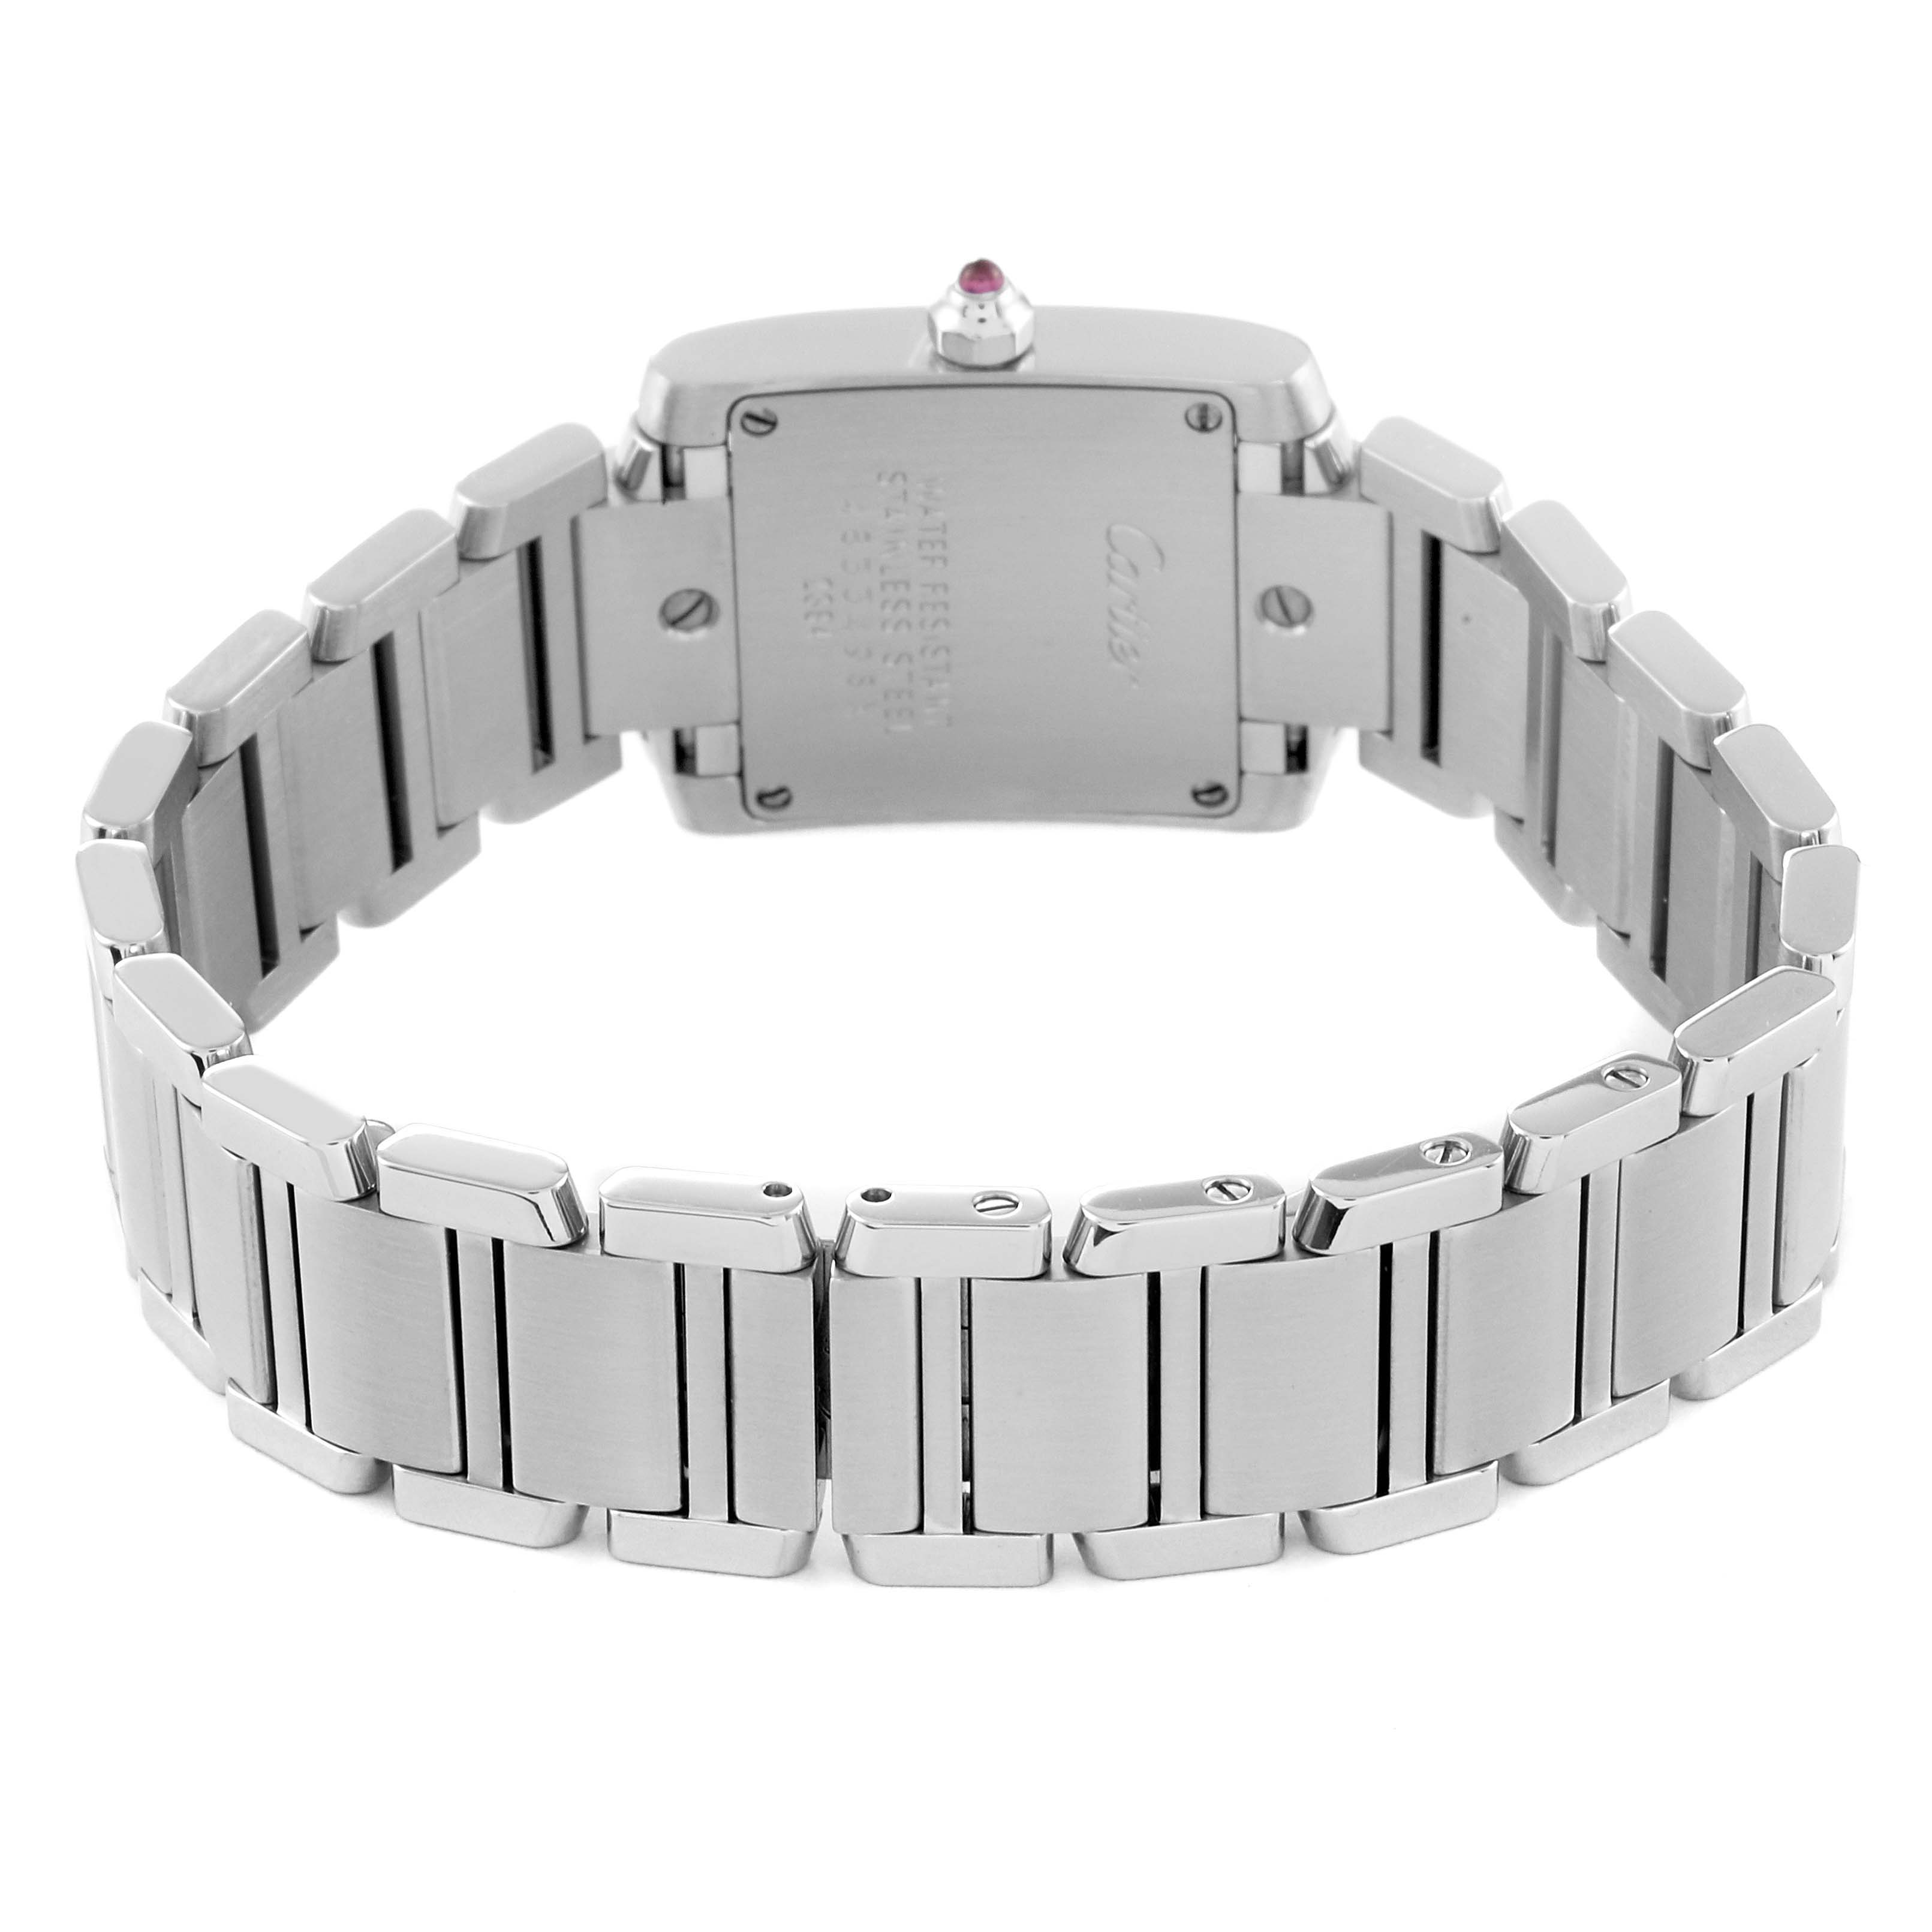 Cartier Tank Francaise Mother Of Pearl Steel Ladies Watch W51028Q3 ...